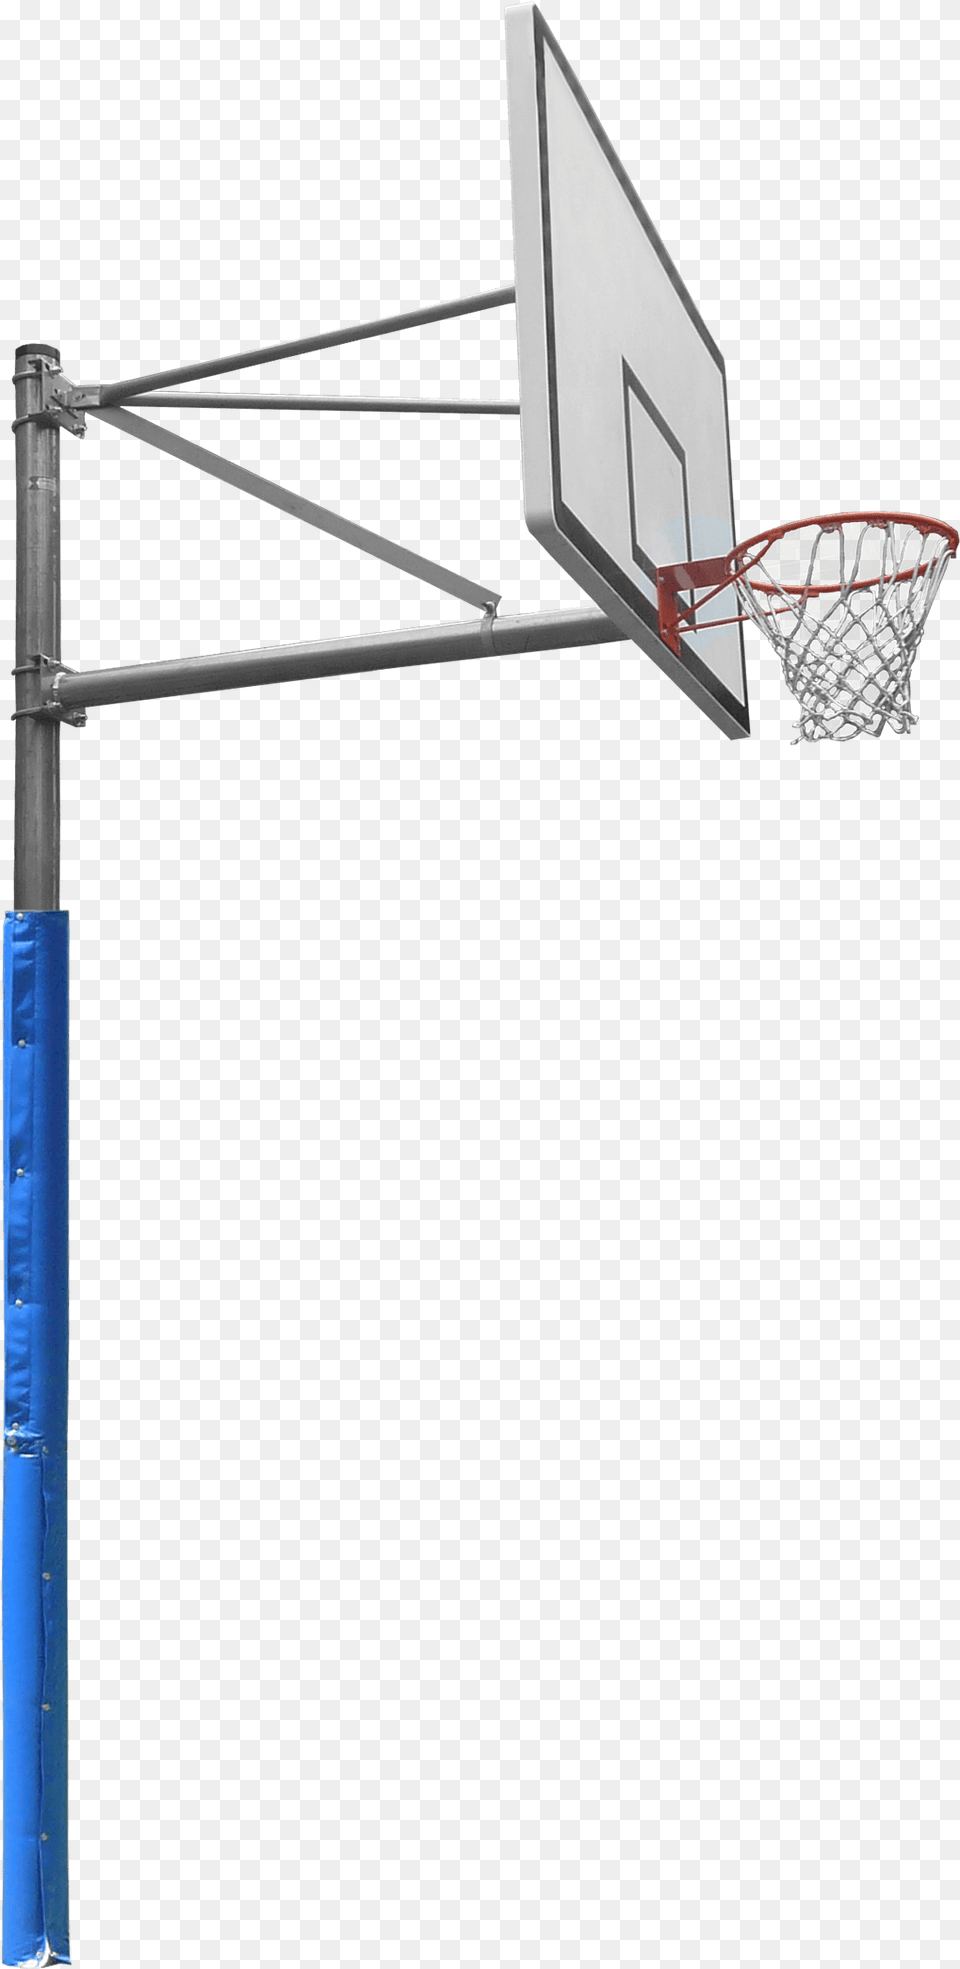 Essentials Outdoor Basketball Rma Sport Equipment And Surfaces Basketball Rim, Hoop Free Png